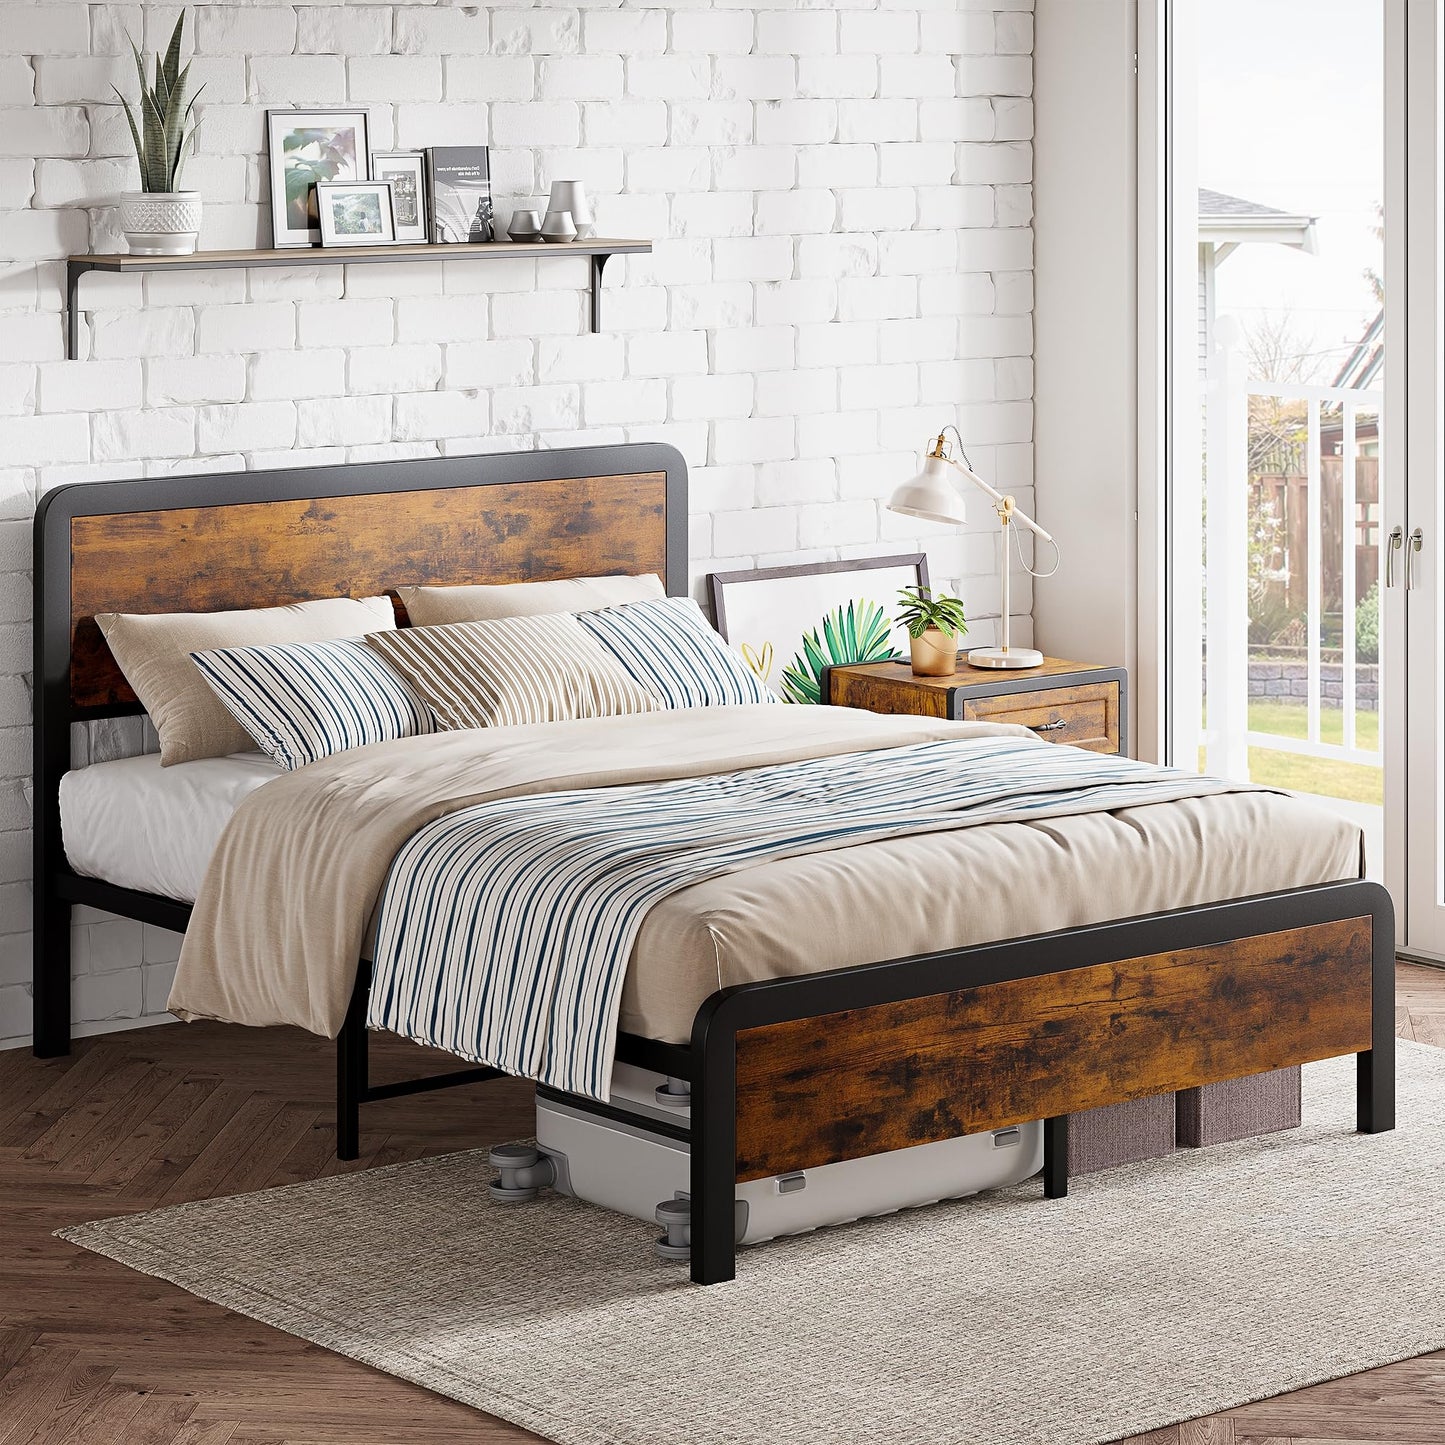 GAOMON 14 Inch Platform Bed Frame with Rustic Vintage Wooden Headboard and Footboard, No Box Spring Needed,Mattress Foundation,Strong Metal Slats